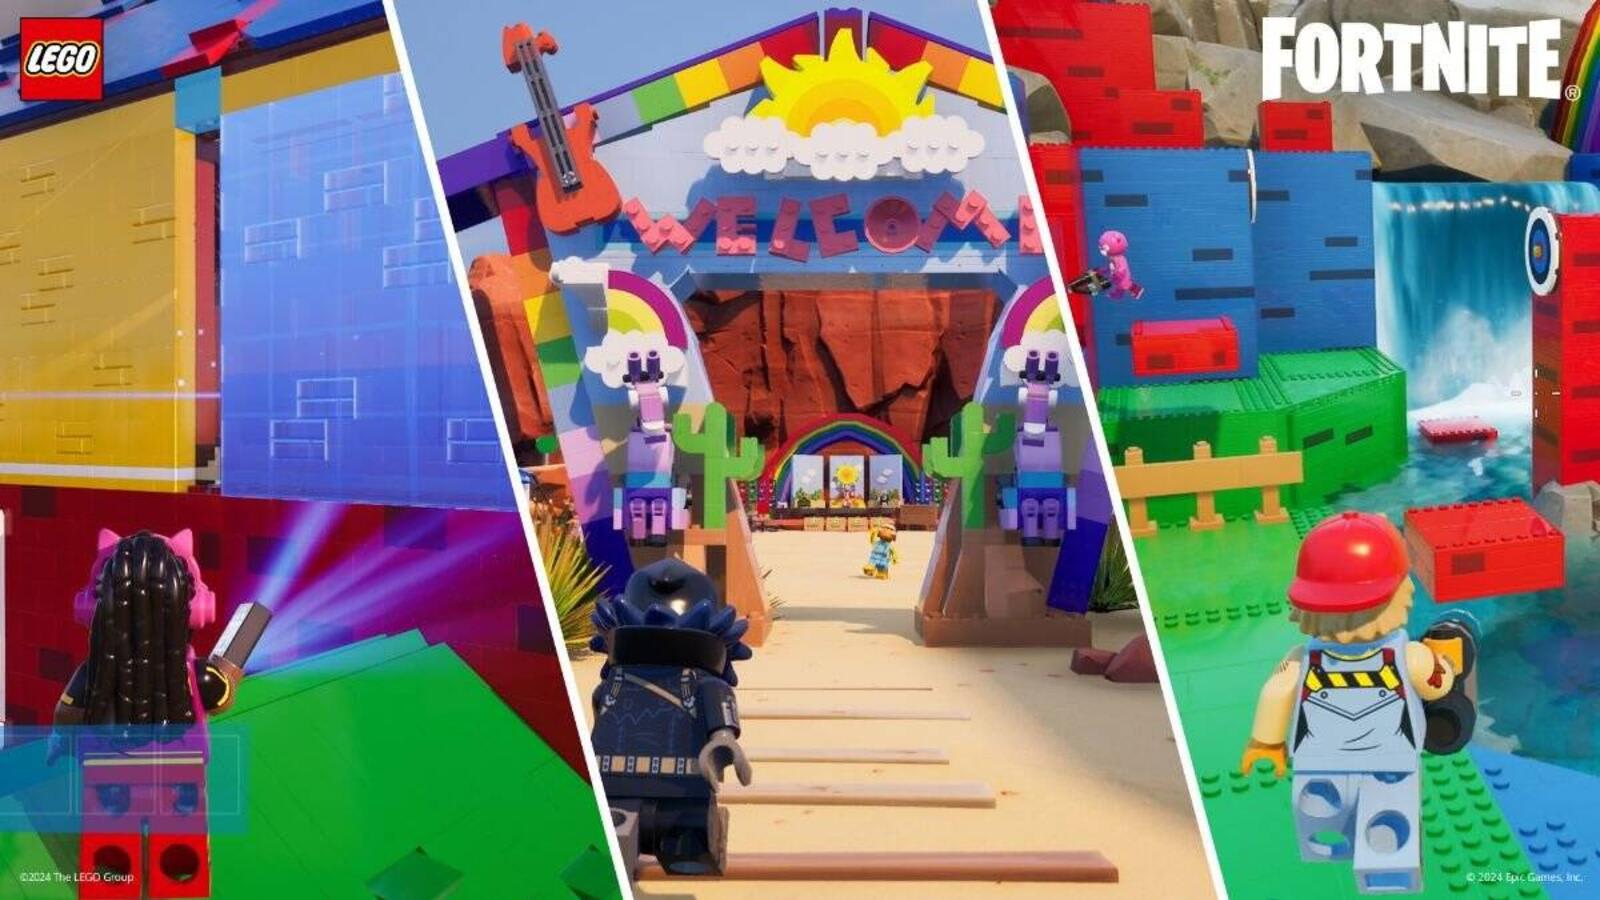 FORTNITE Players Can Now Build Their Own LEGO Islands